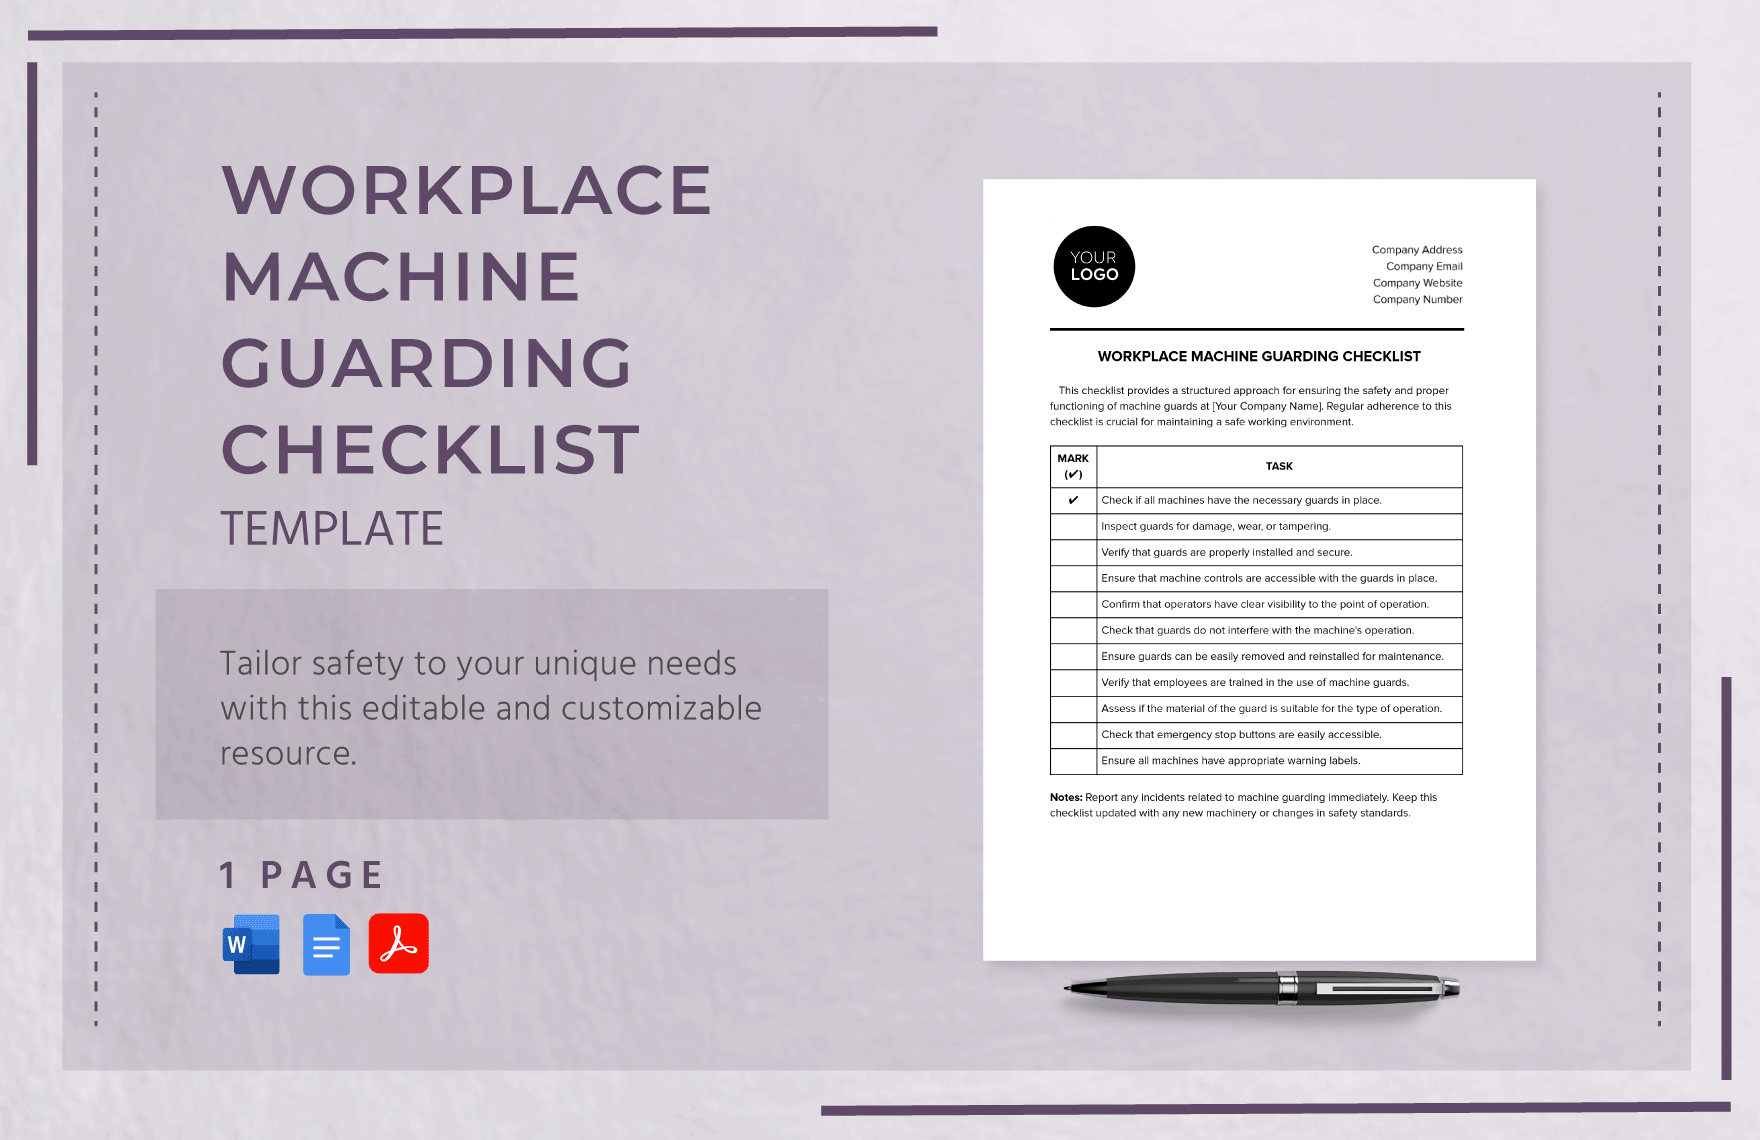 Workplace Machine Guarding Checklist Template in Word, Google Docs, PDF